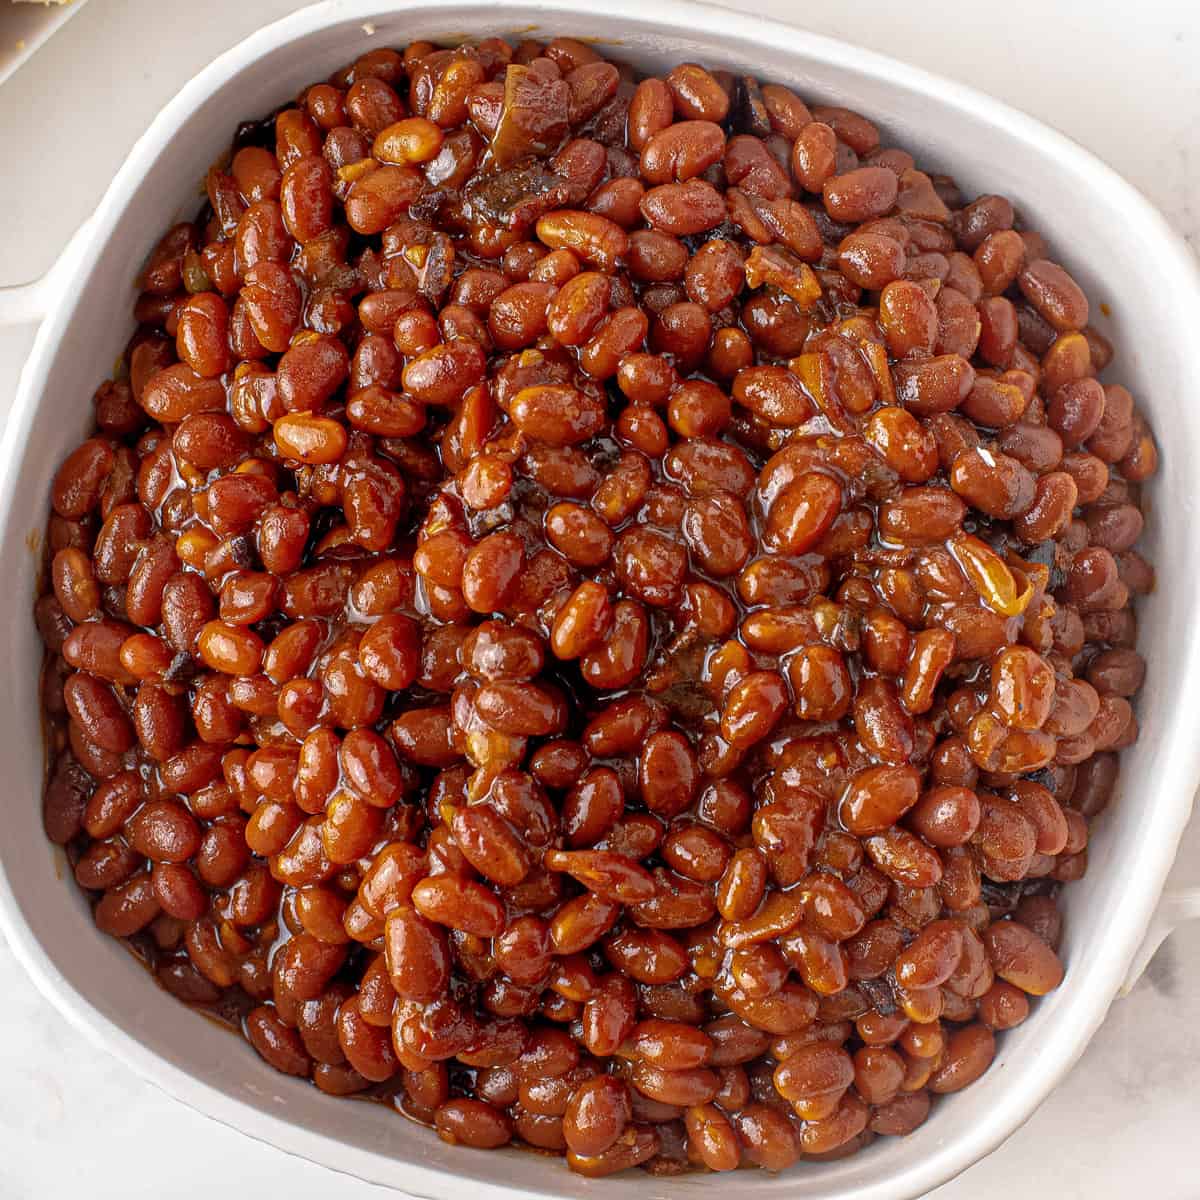 https://www.thechunkychef.com/wp-content/uploads/2021/09/Instant-Pot-Baked-Beans-recipe-card.jpg